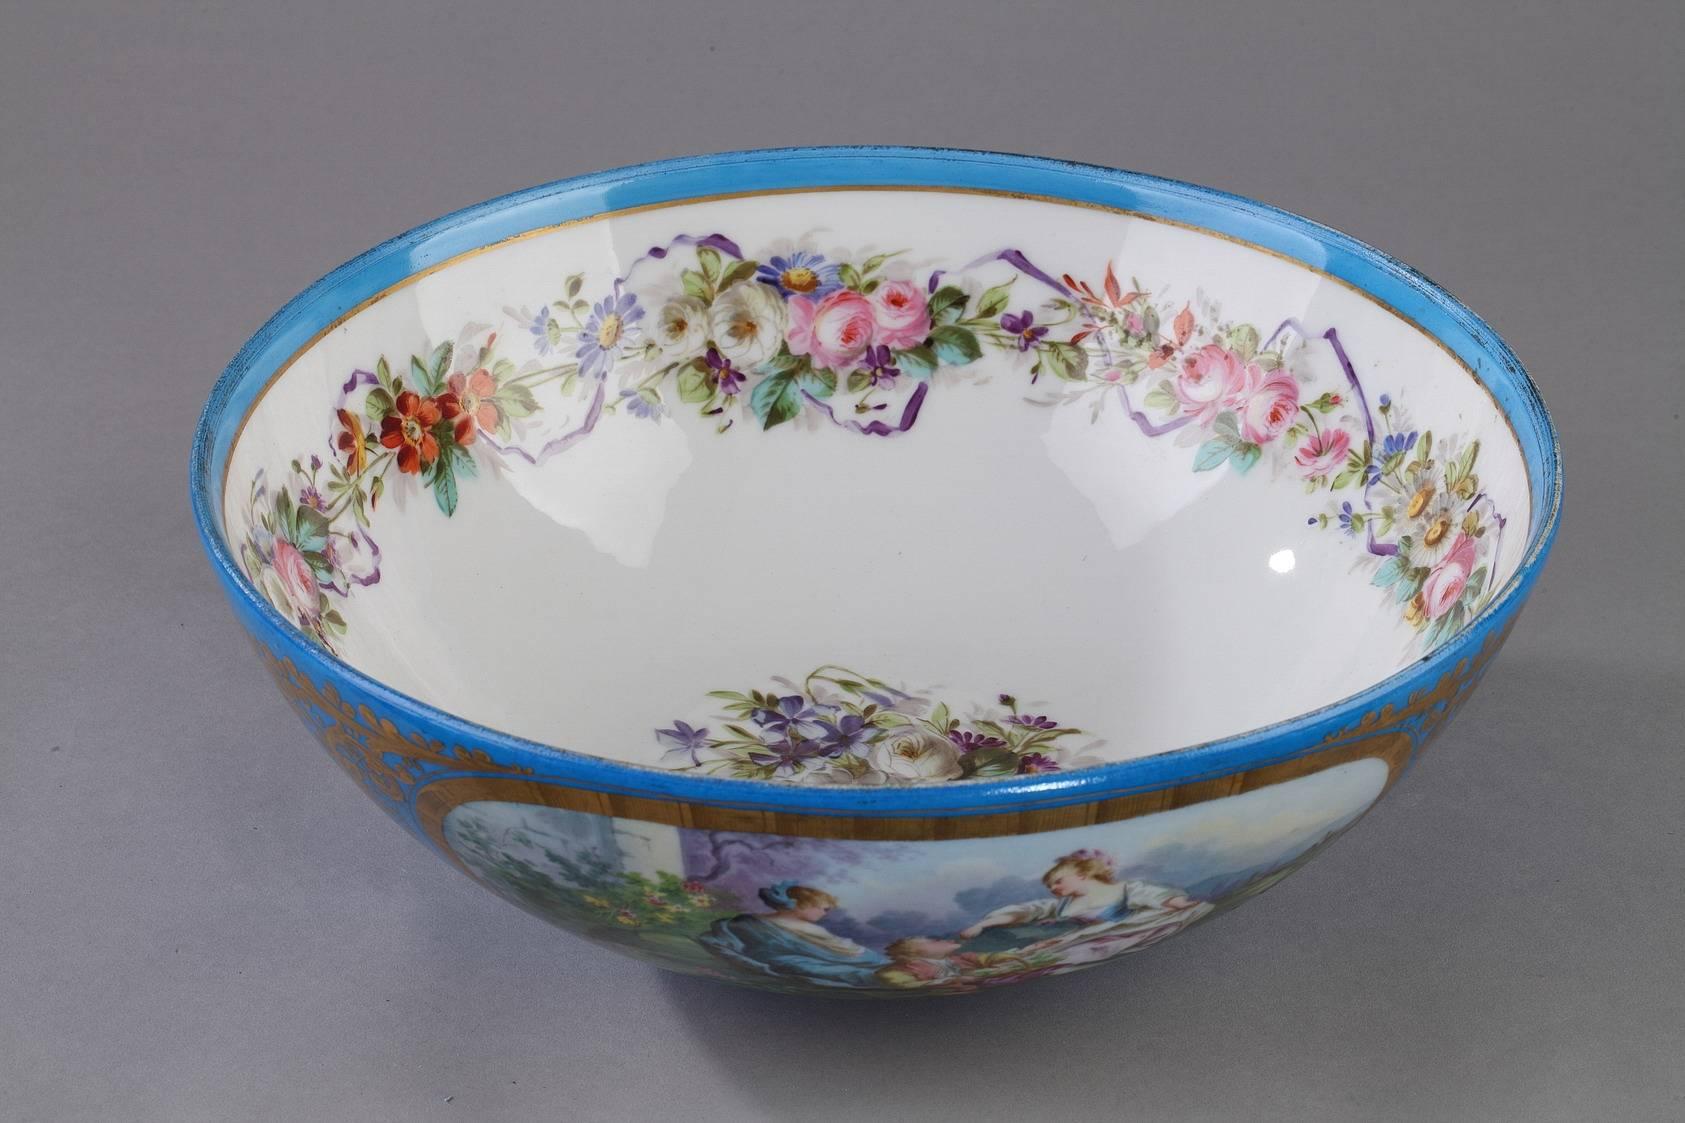 Large porcelain bowl embellished with large medallions featuring, on one side, gallant figures in a landscape, and on the other side, an overflowing bouquet of flowers. The medallions are framed in foliage painted with gold. The interior of the bowl